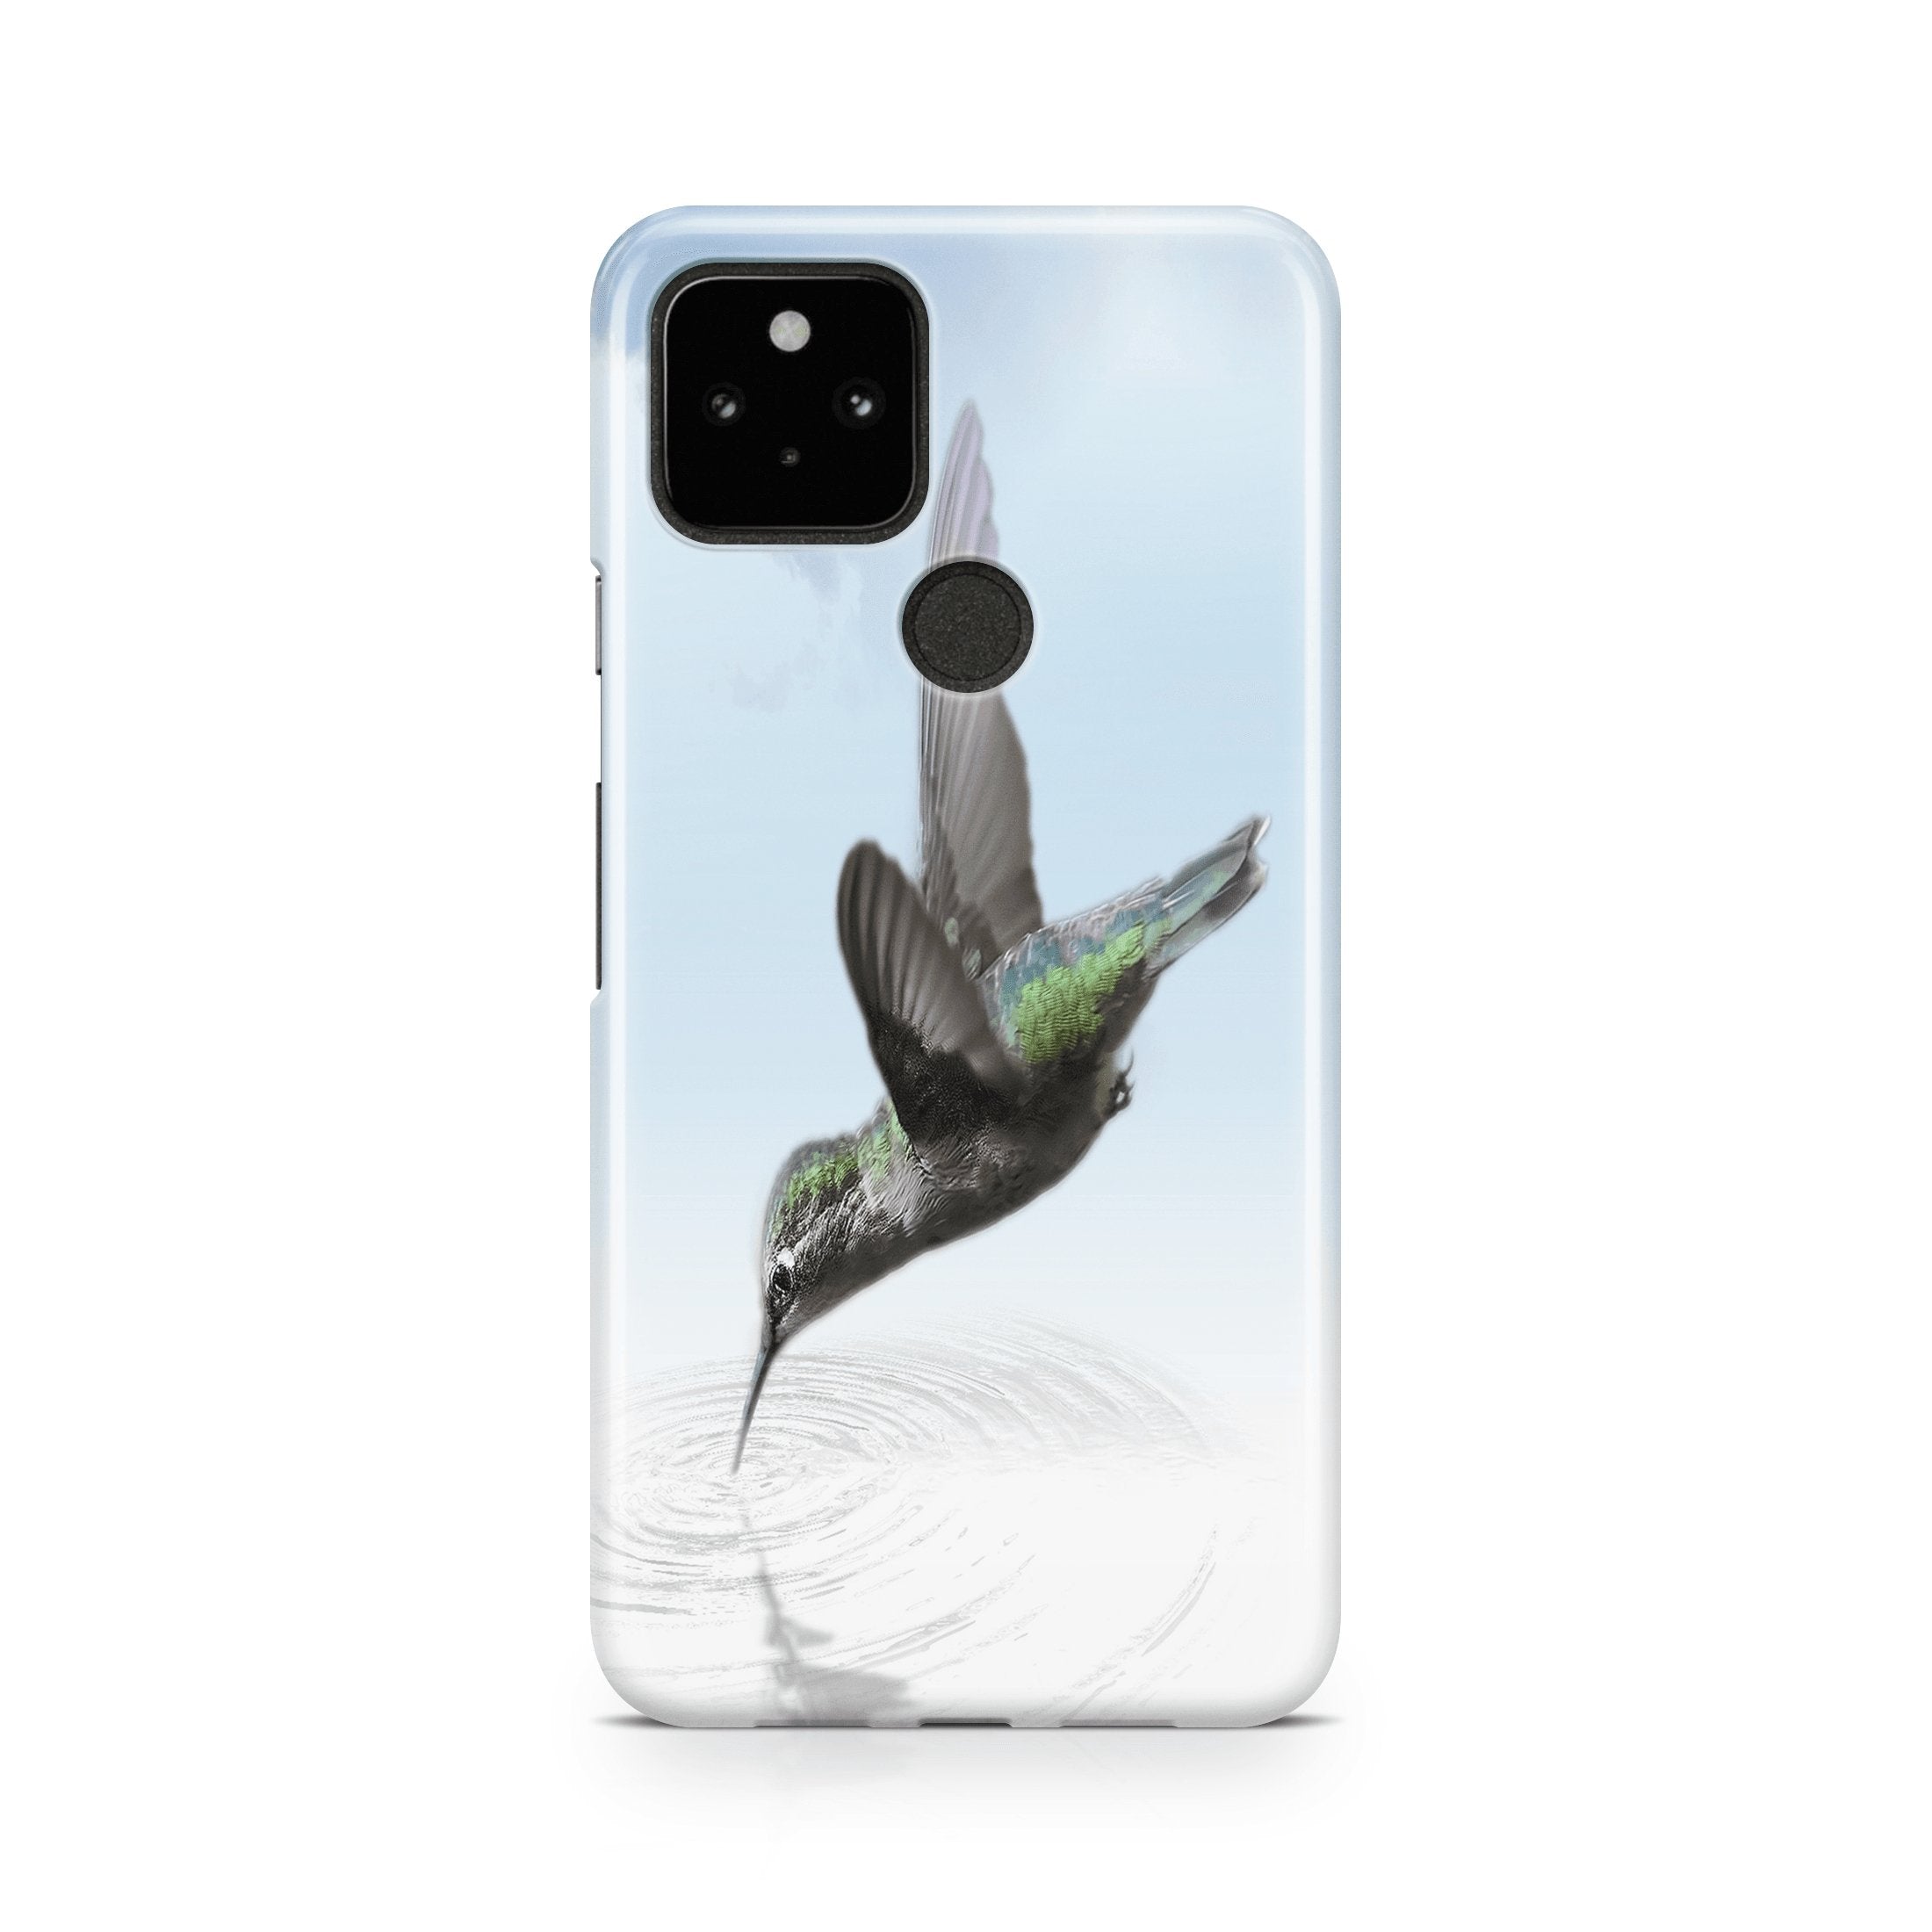 Simple Hummingbird - Google phone case designs by CaseSwagger